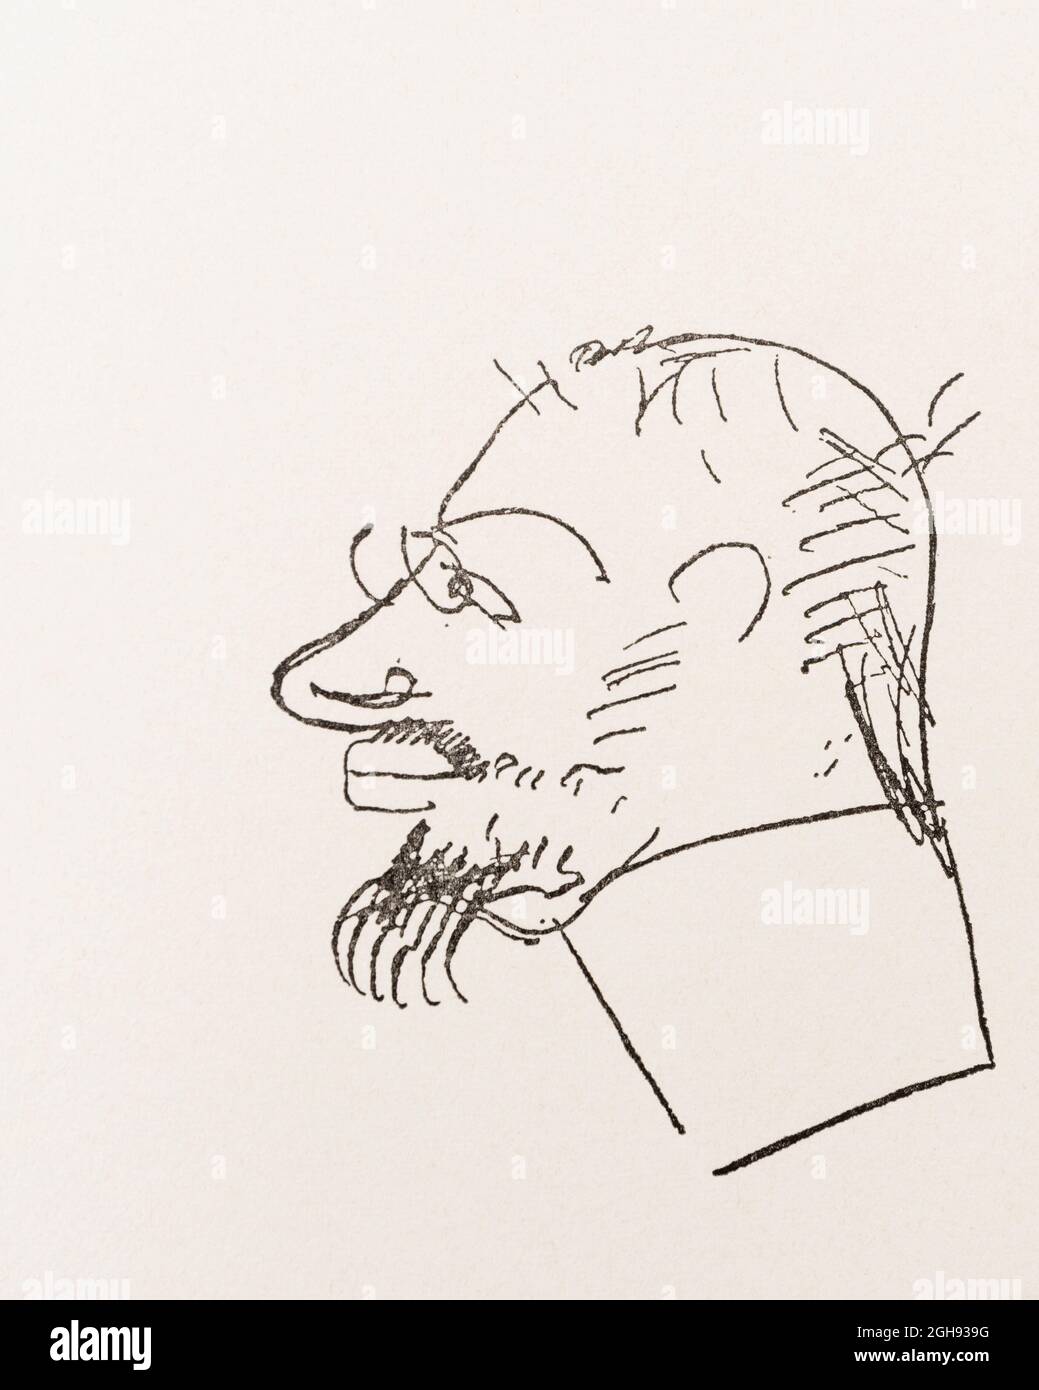 Playful self portrait caricature by Henri Toulouse-Lautrec, 1864 - 1901, French Post-Impressionist artist. Stock Photo